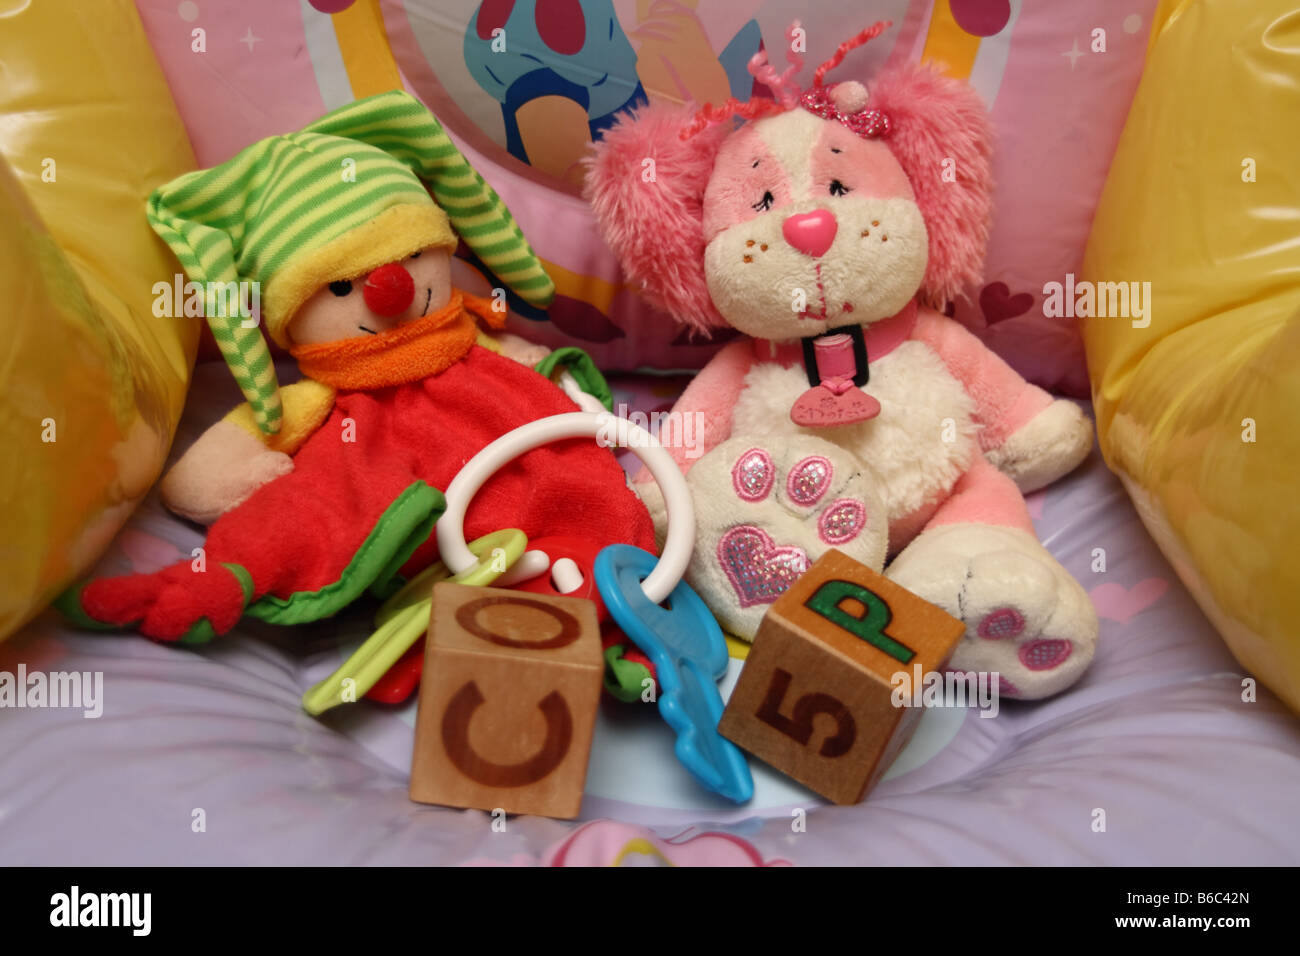 Children's toys arranged on a inflatable chair Stock Photo